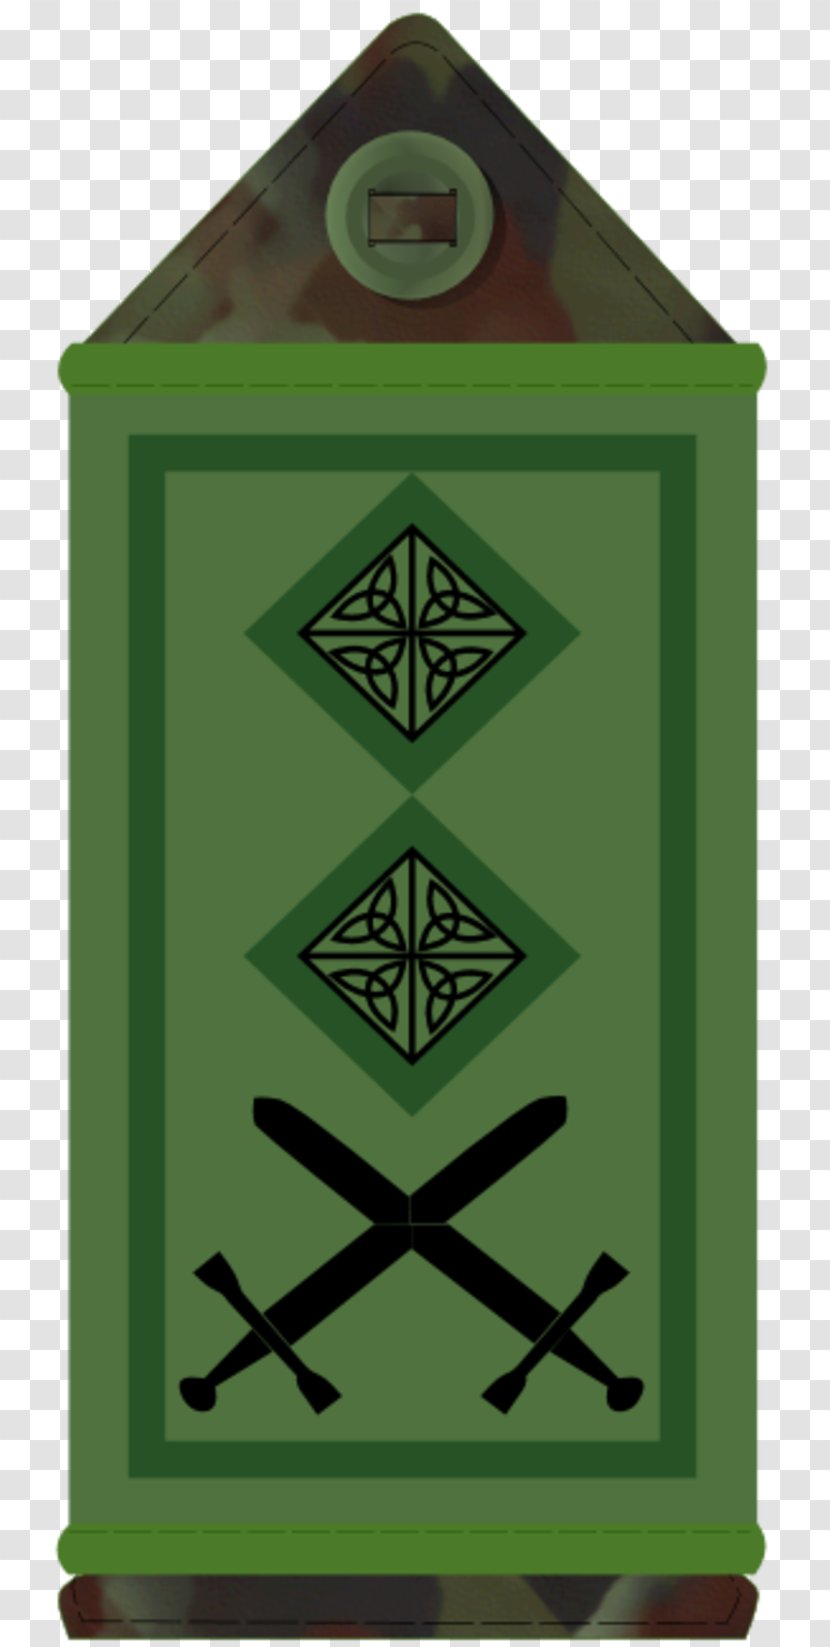 Corporal Sergeant Military Rank Non-commissioned Officer Army Transparent PNG